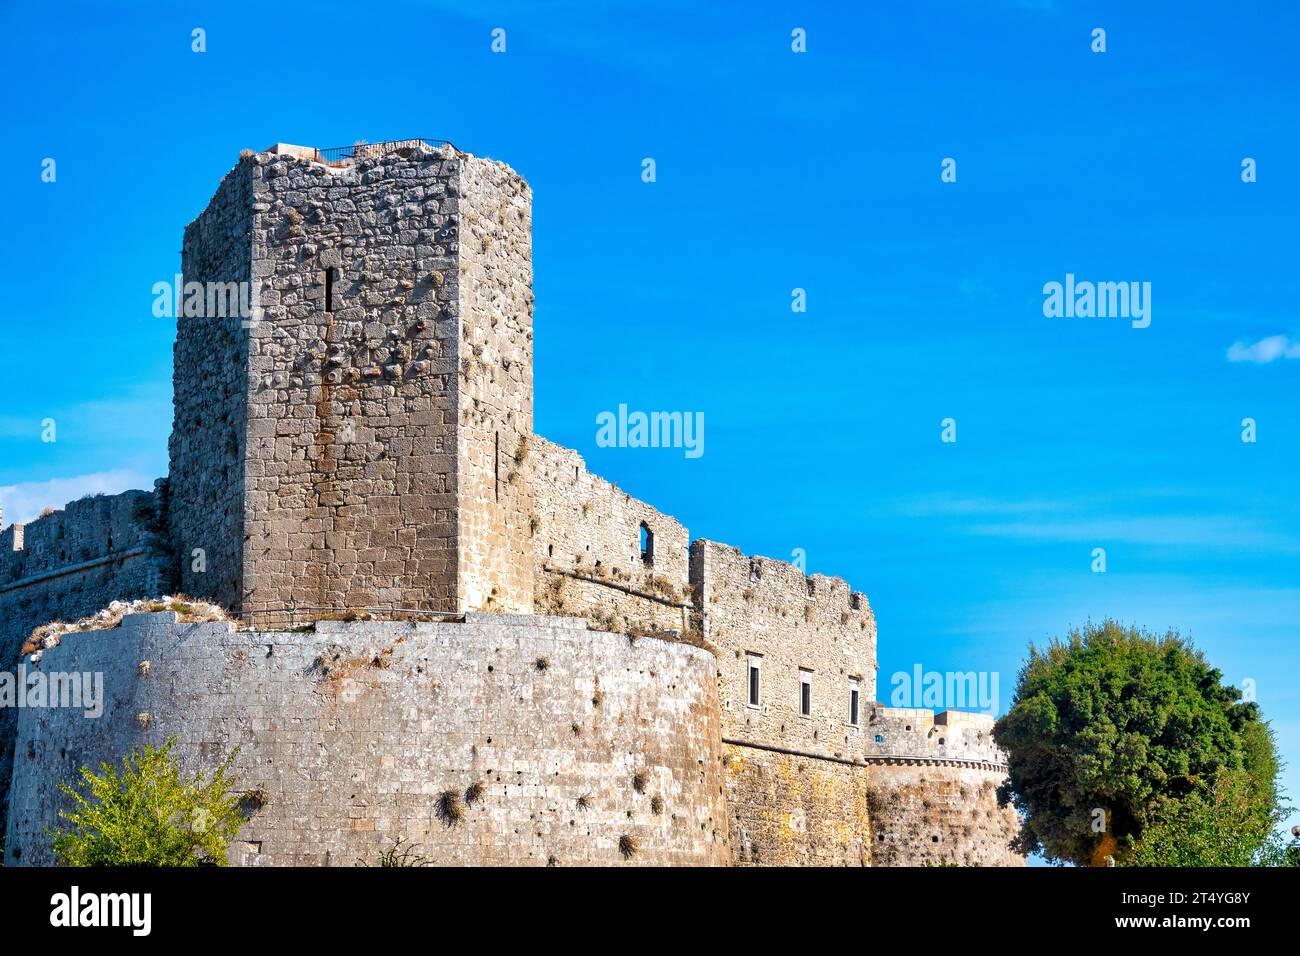 Tower of the Castle of Monte Sant'Angelo, Italy Stock Photo